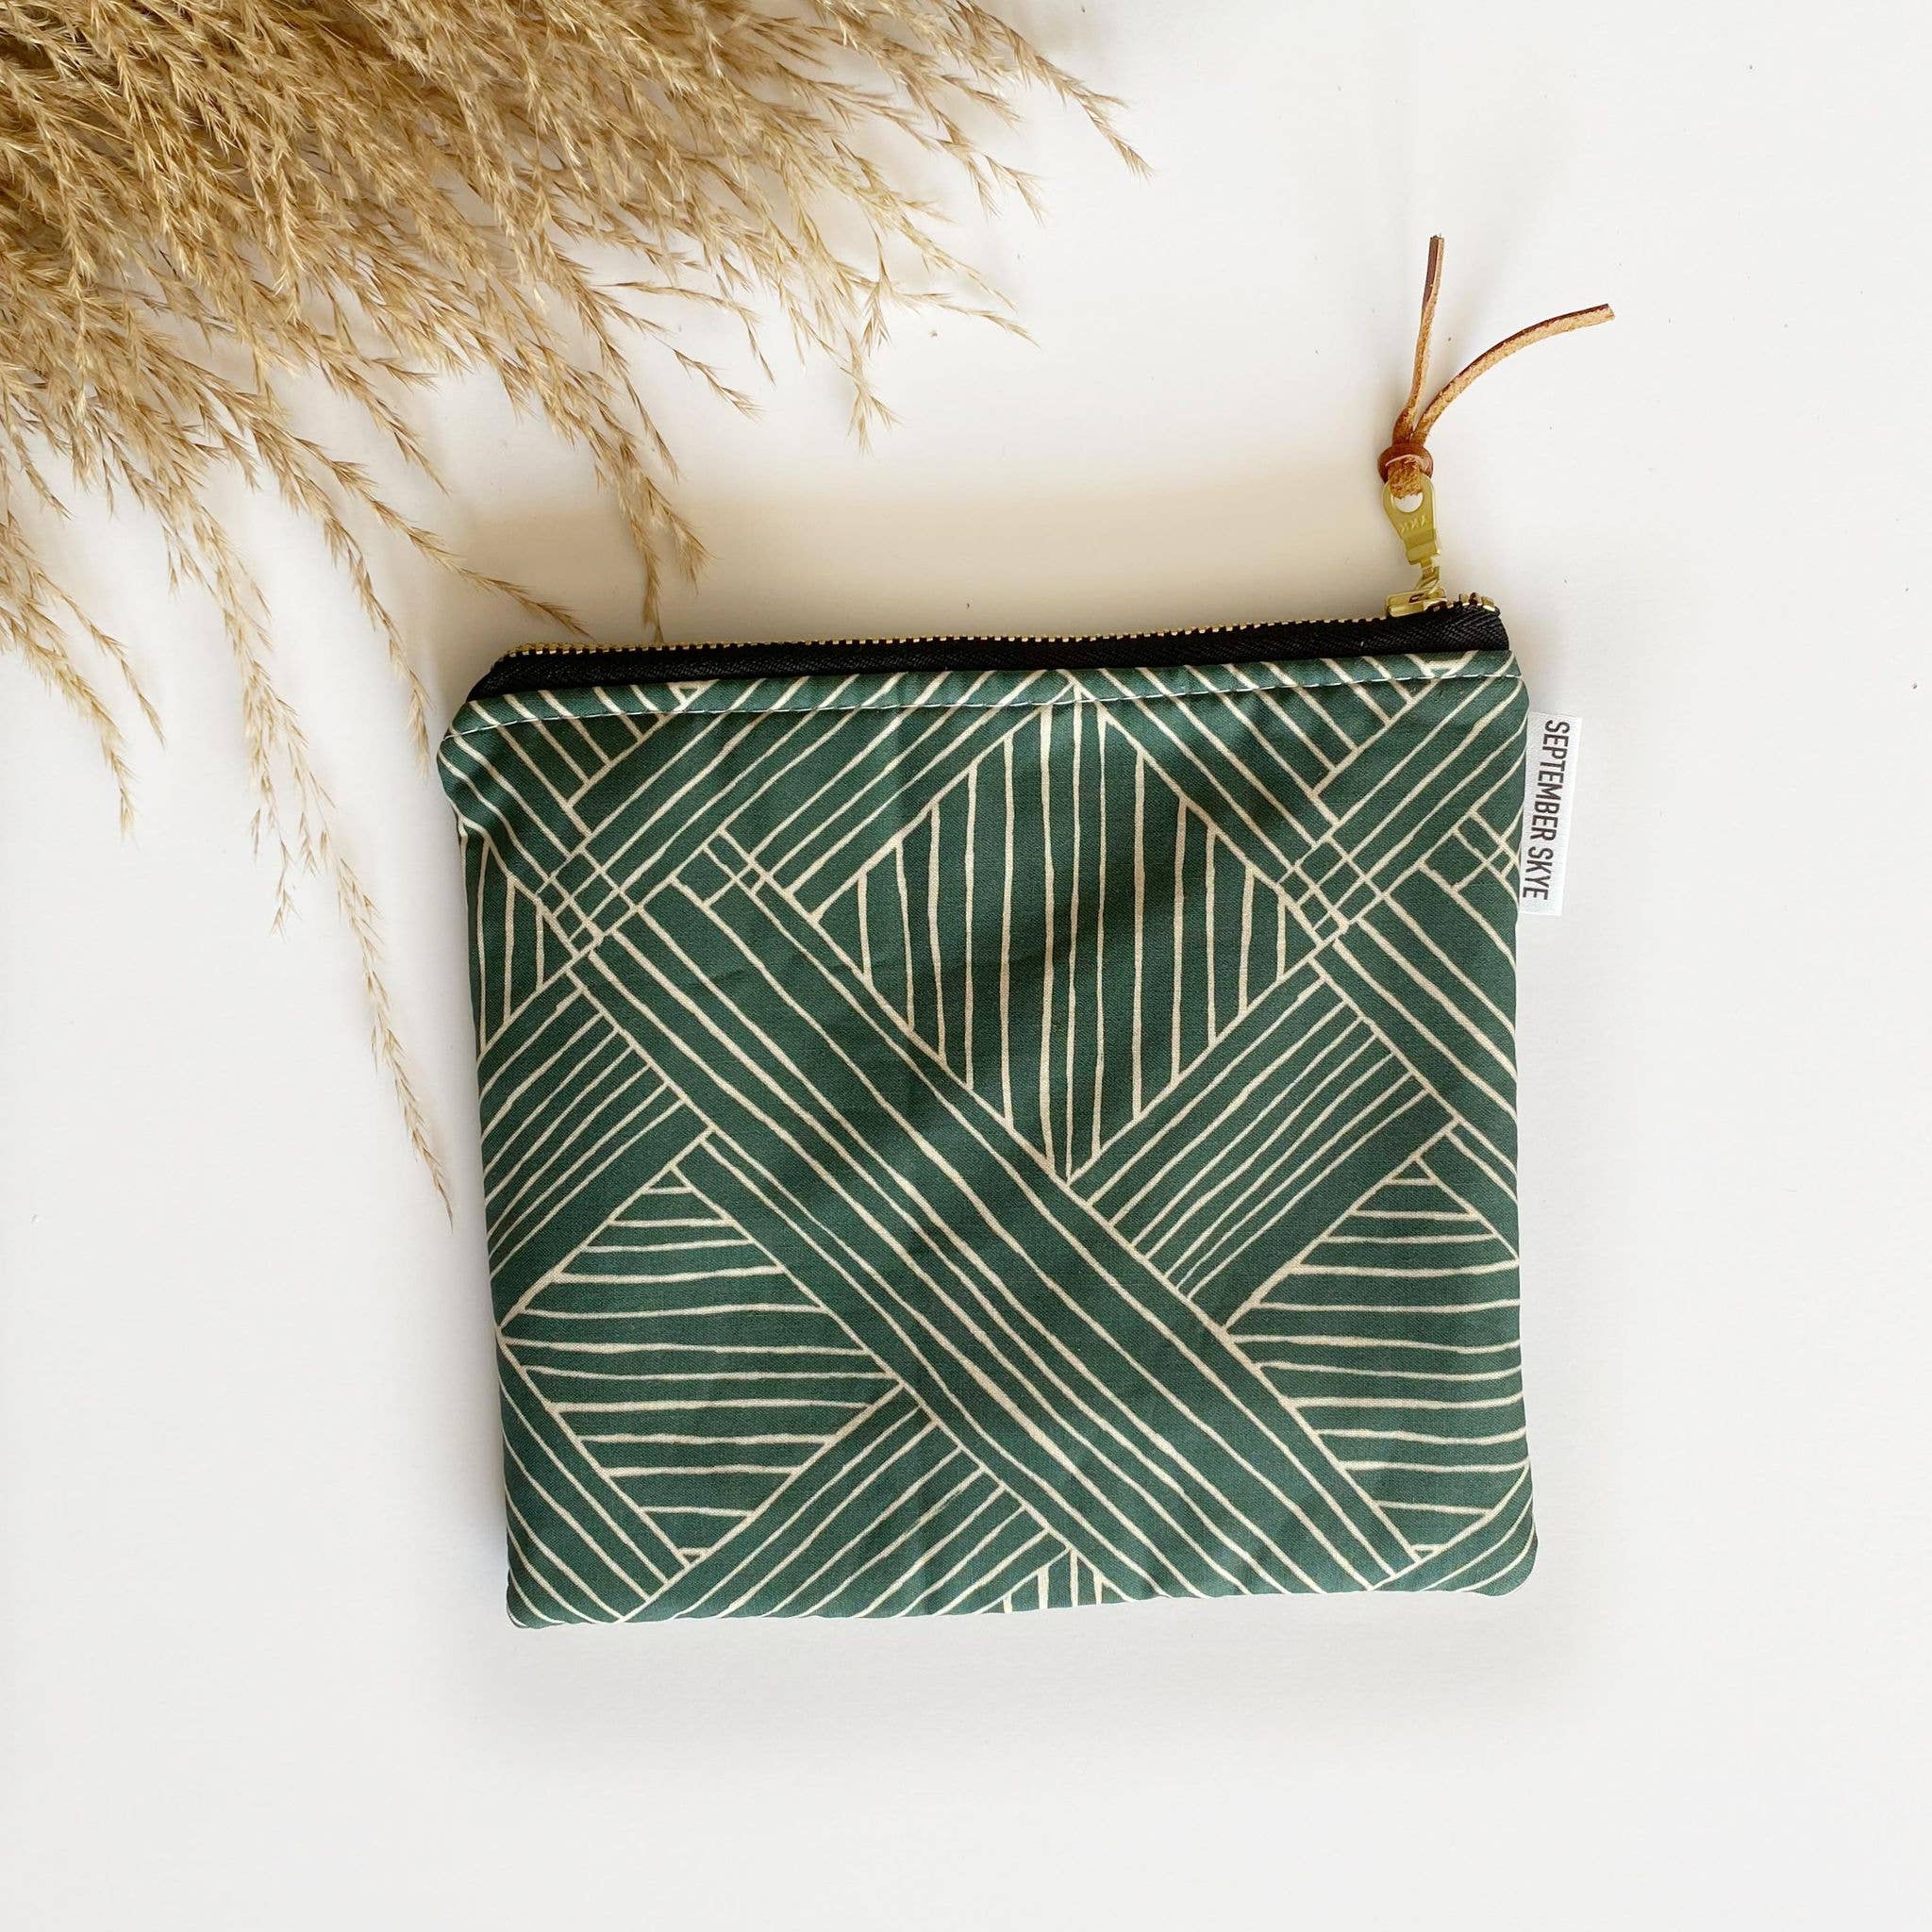 Simple zipped pouch in hunter green geometric